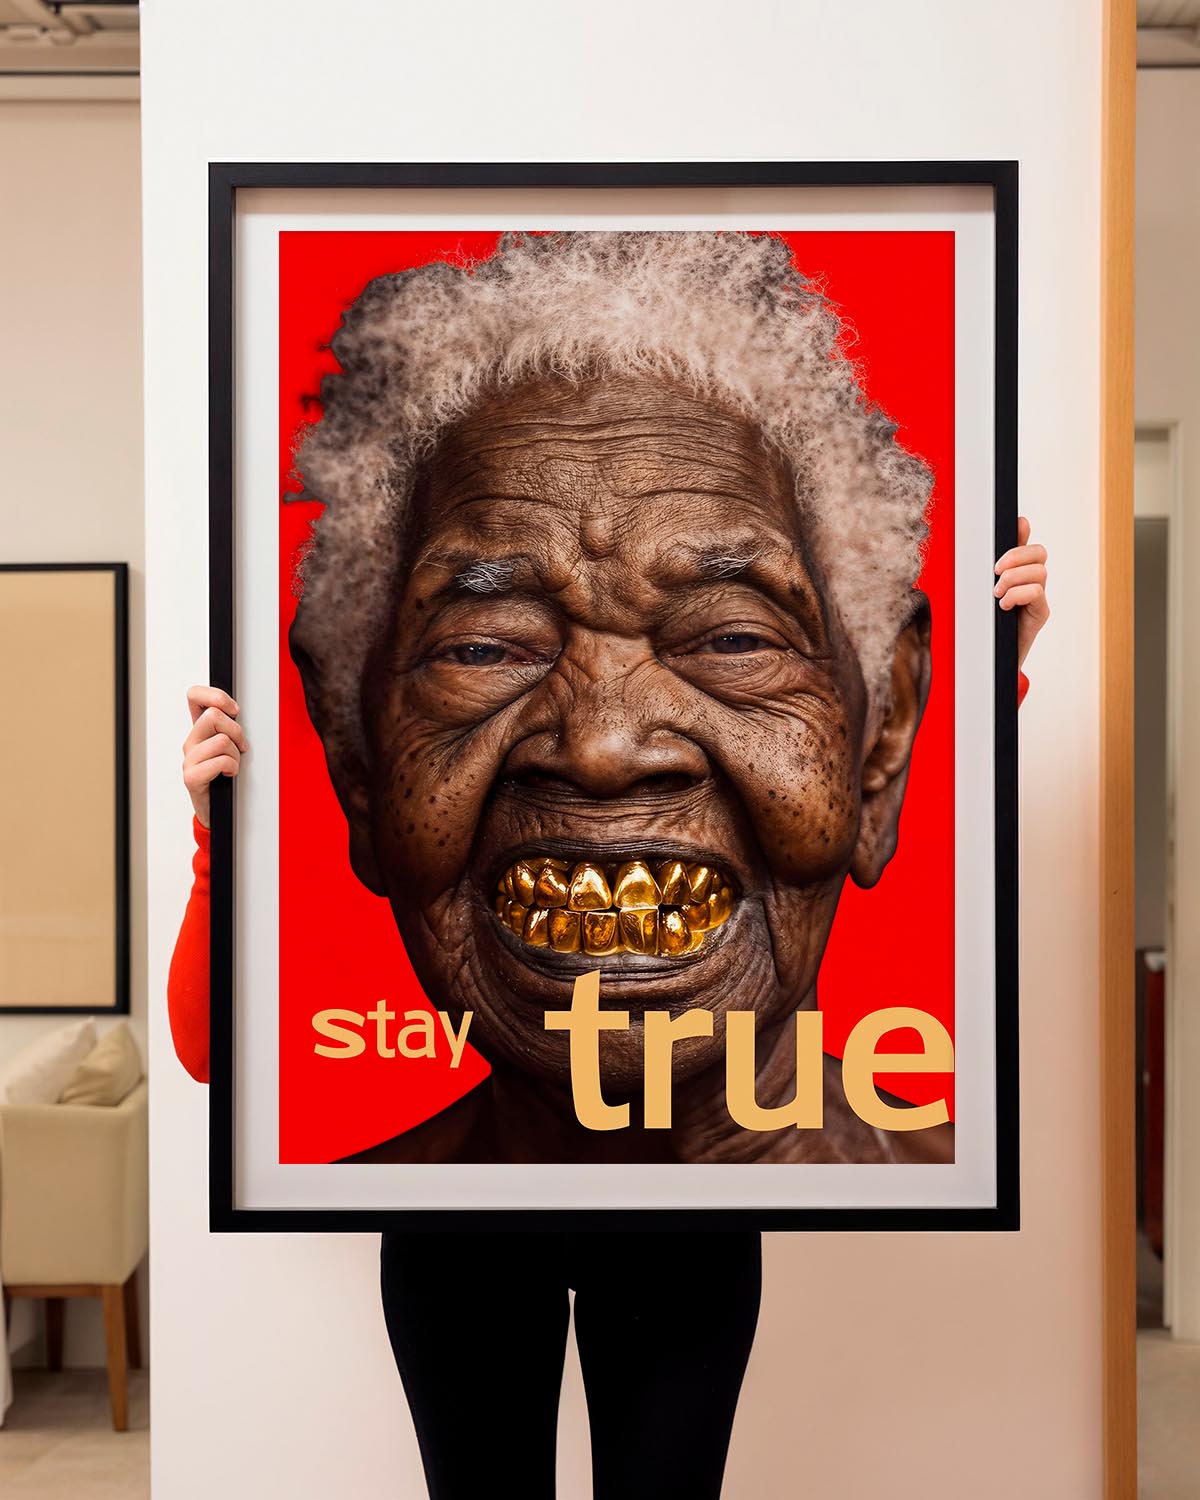  A close-up portrait of an elderly individual with a broad smile, revealing gold-plated teeth. Their skin is richly textured with deep wrinkles and they have a head of curly grey hair. The background is a vivid red with the words "stay true" in gold, lowercase font positioned at the bottom. The image conveys a message of authenticity and lived experience.